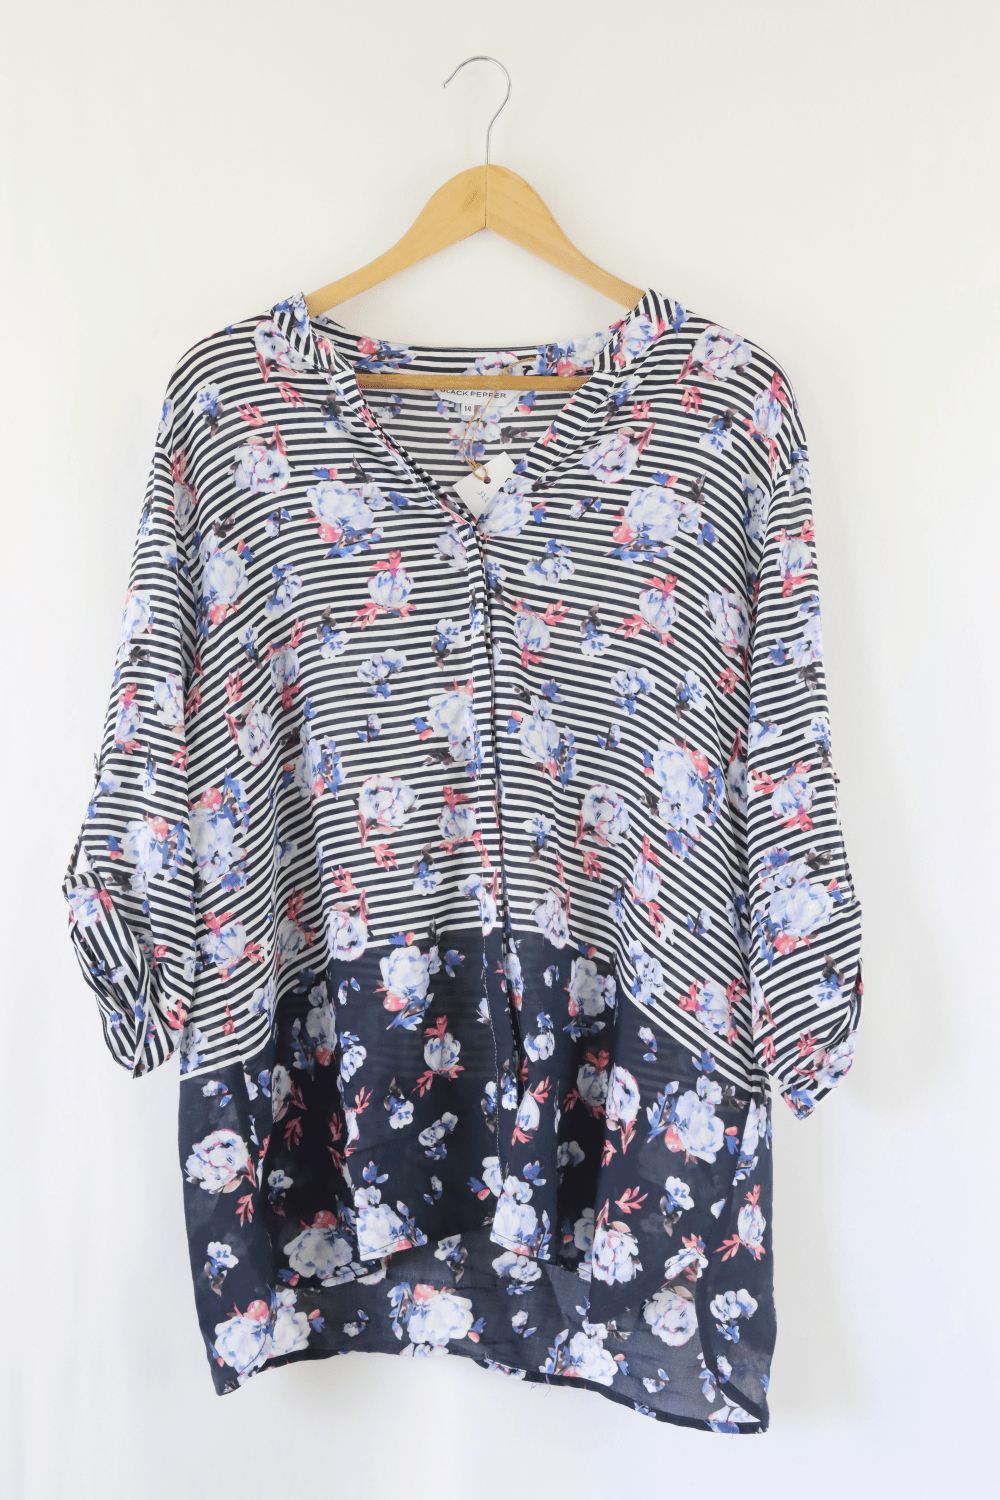 Black Pepper Striped Top With Florals 14